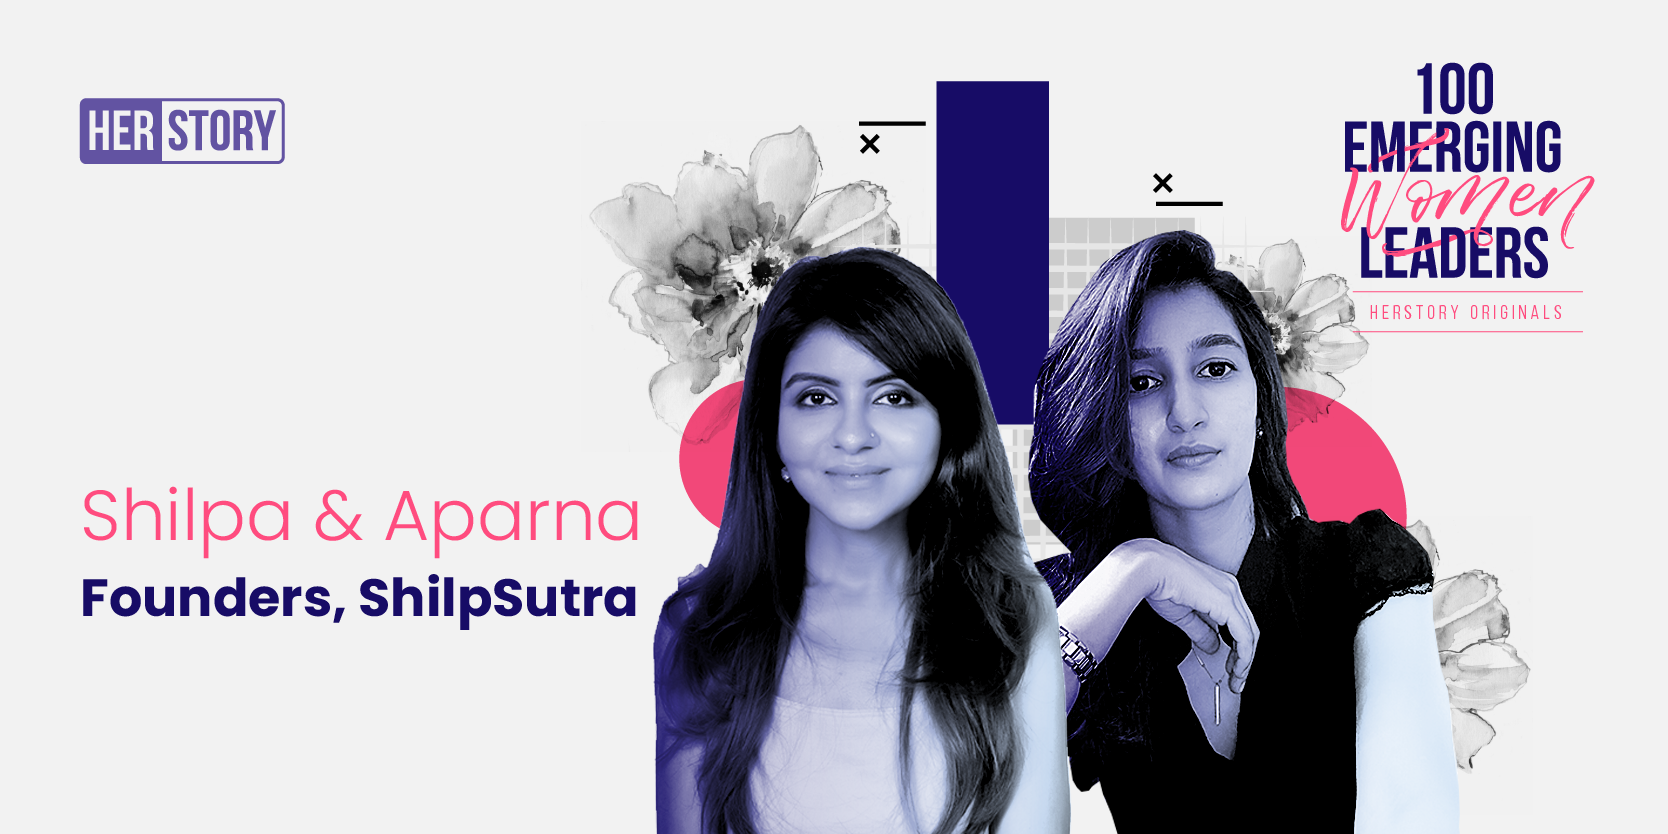 [100 Emerging Women Leaders] Meet the founders behind this D2C brand, whose footwear are sported by Kangana Ranaut, Kriti Sanon